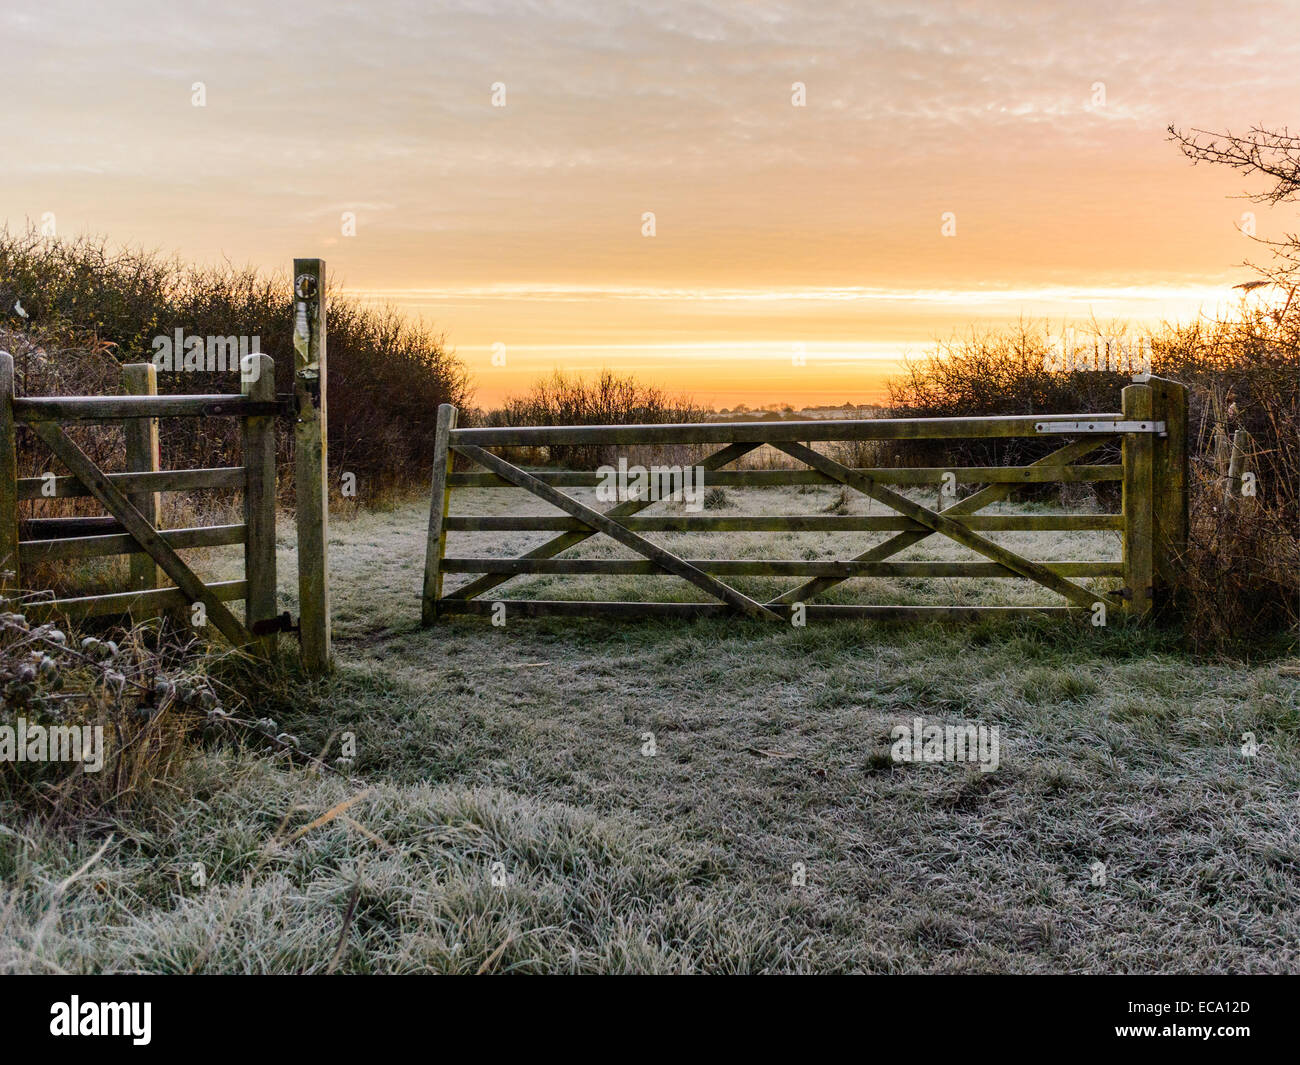 Countryside scene depicting a blanket of early morning frost covering a pathway leading to a partly open 5 bar gate at sunrise. Stock Photo